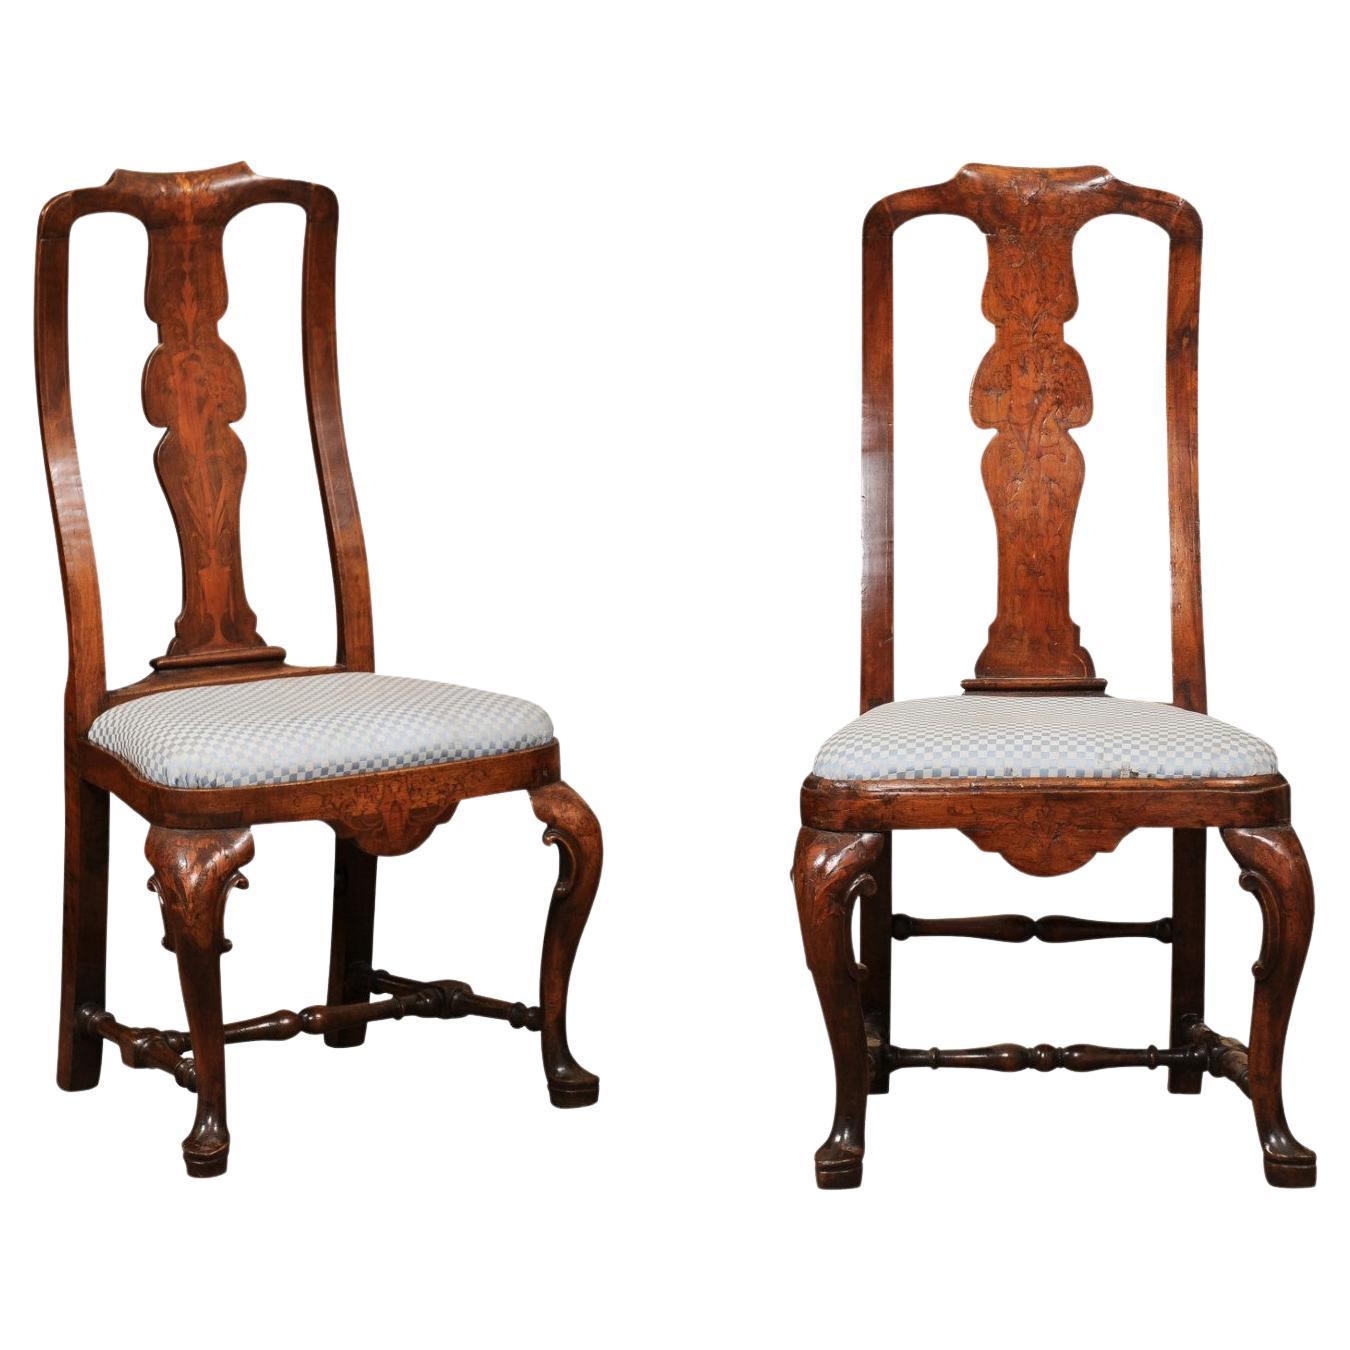 Pair of Dutch 18th Century Walnut Side Chairs with Marquetry Inlay & Pad Feet For Sale